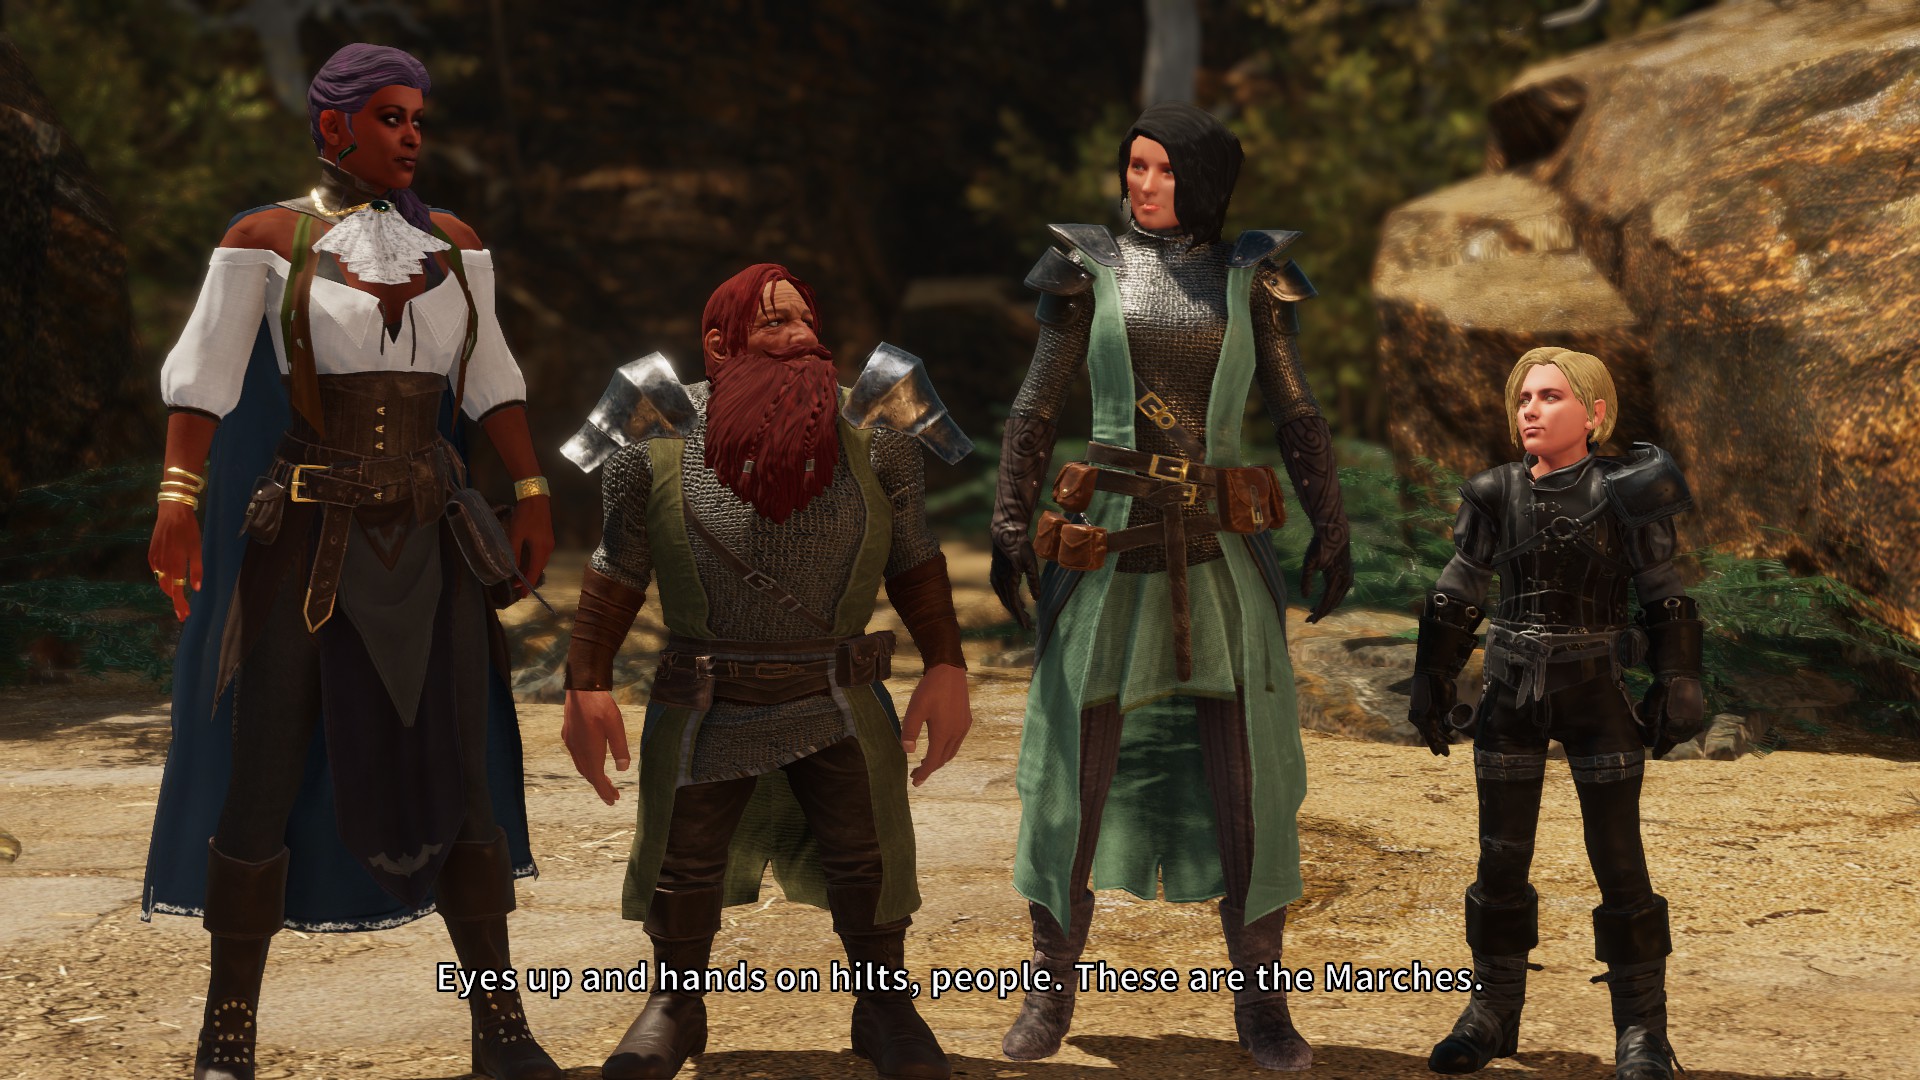 My adventuring party frequently banters with each other